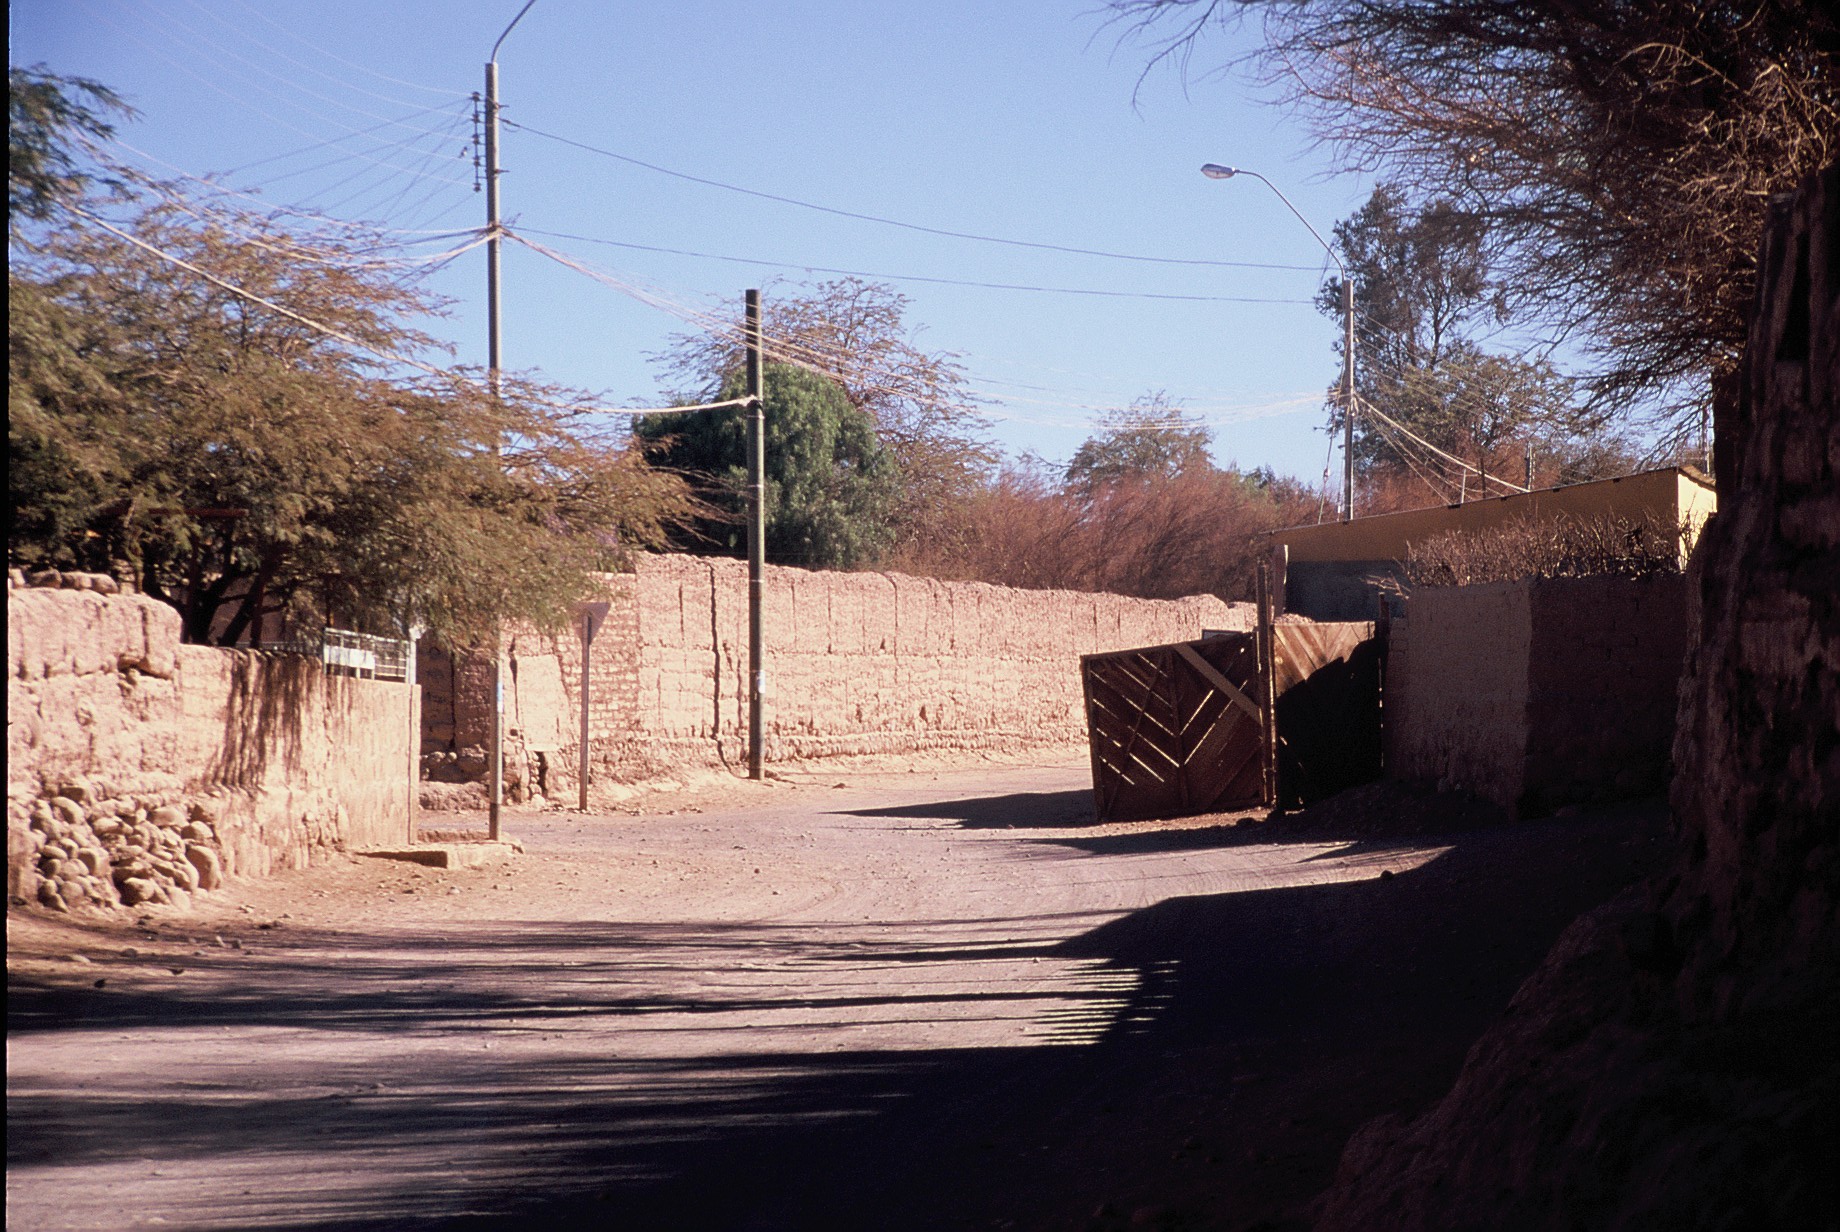 A typical street in San Pedro